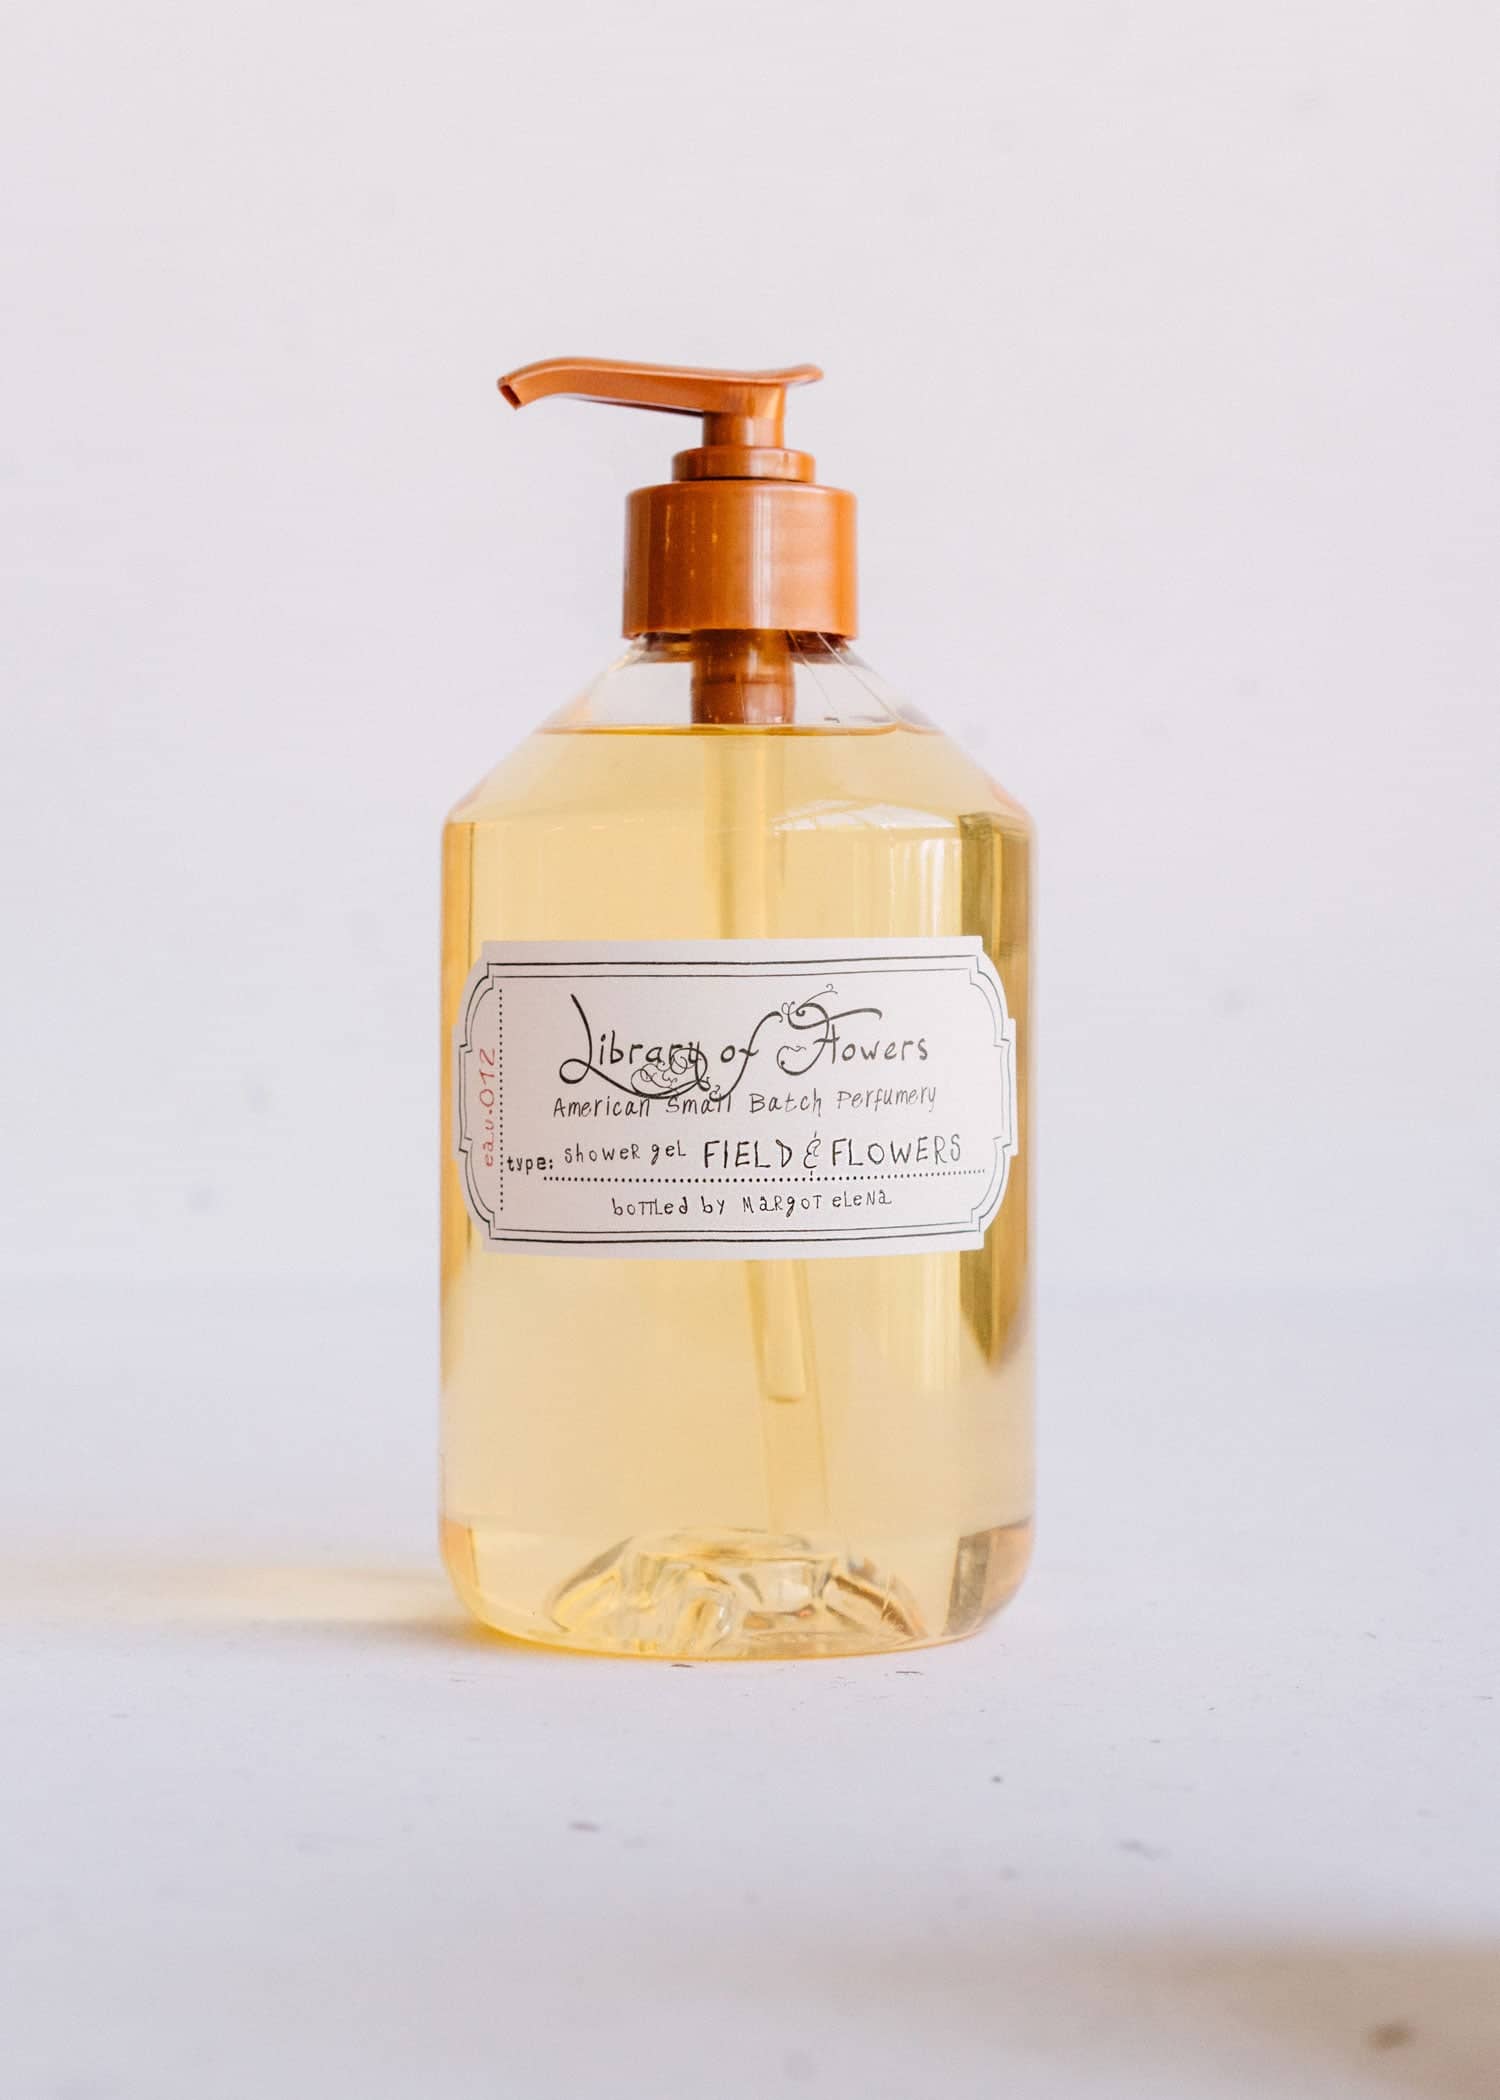 Cashmere Clear Liquid Gel Soap - Decorative Bottle – Rose Of Sharon Soapery